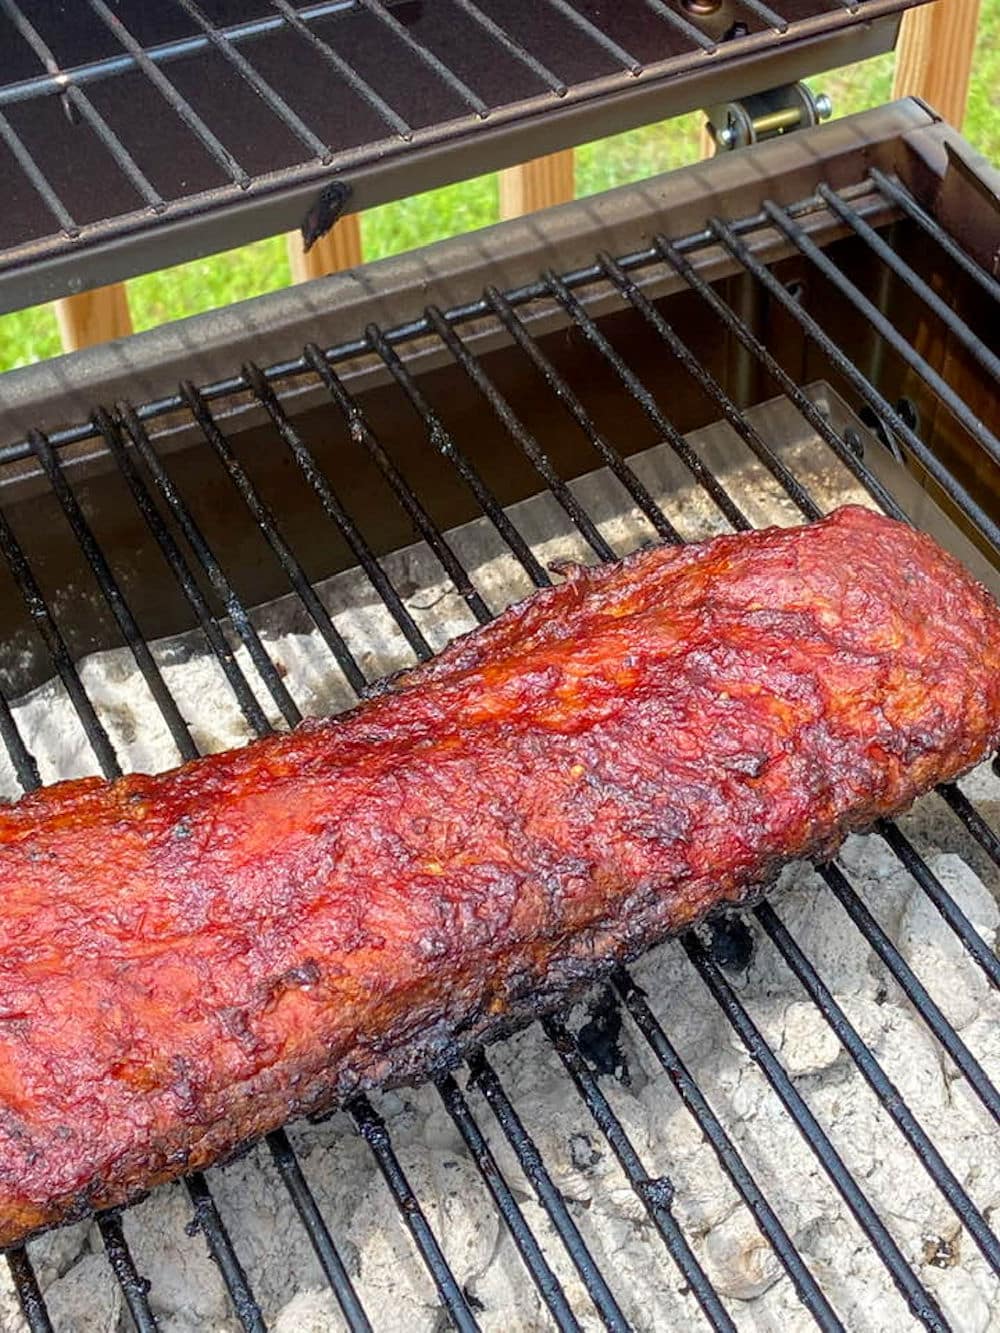 24Bite: Heavily sauced barbecue ribs on the grill